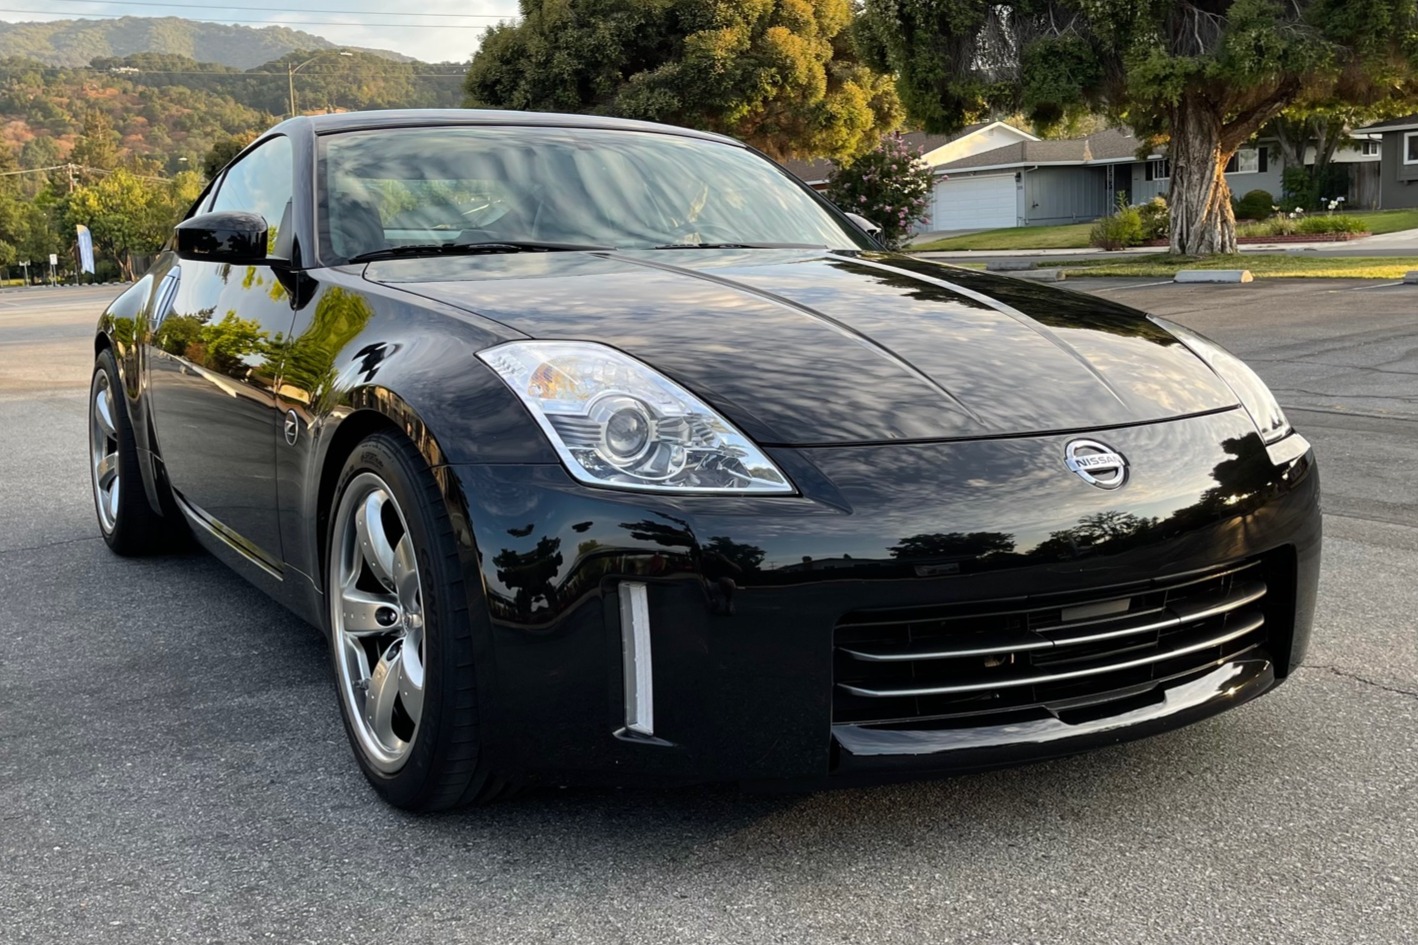 35k-Mile 2006 Nissan 350Z Grand Touring 6-Speed for sale on BaT Auctions -  sold for $17,000 on September 9, 2021 (Lot #54,866) | Bring a Trailer